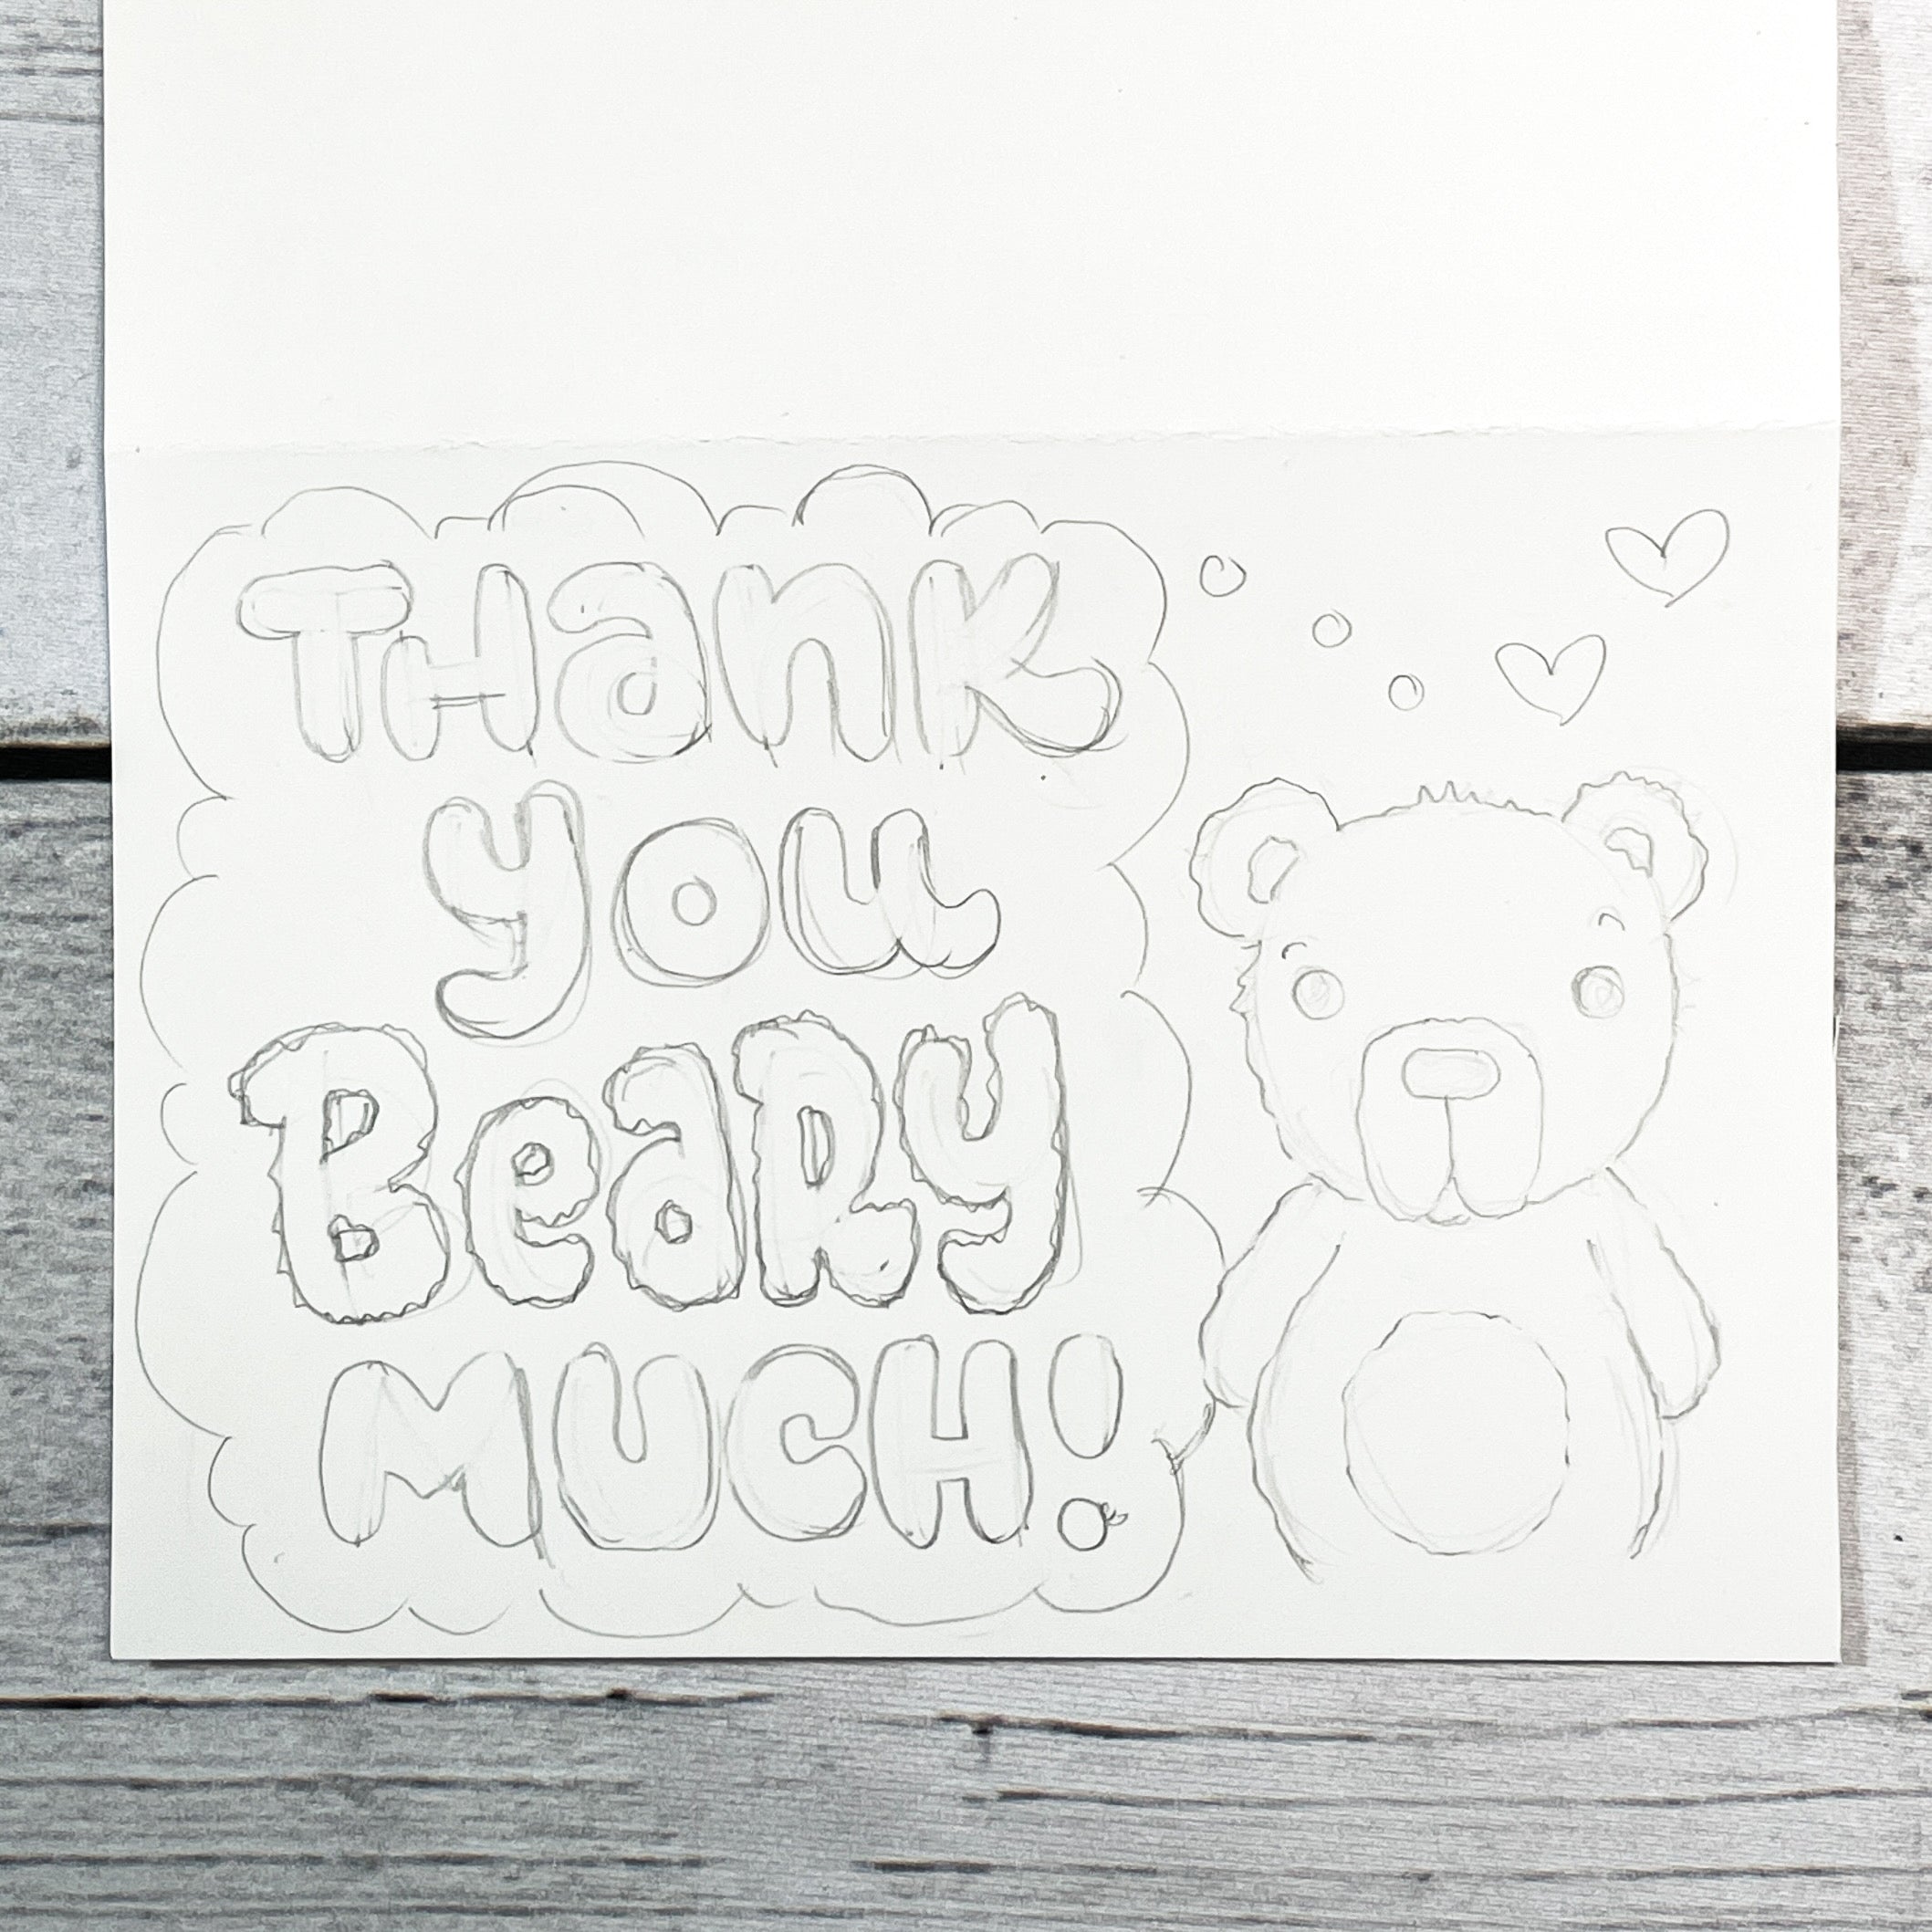 photo of sketched out text "thank you beary much" with bear doodle